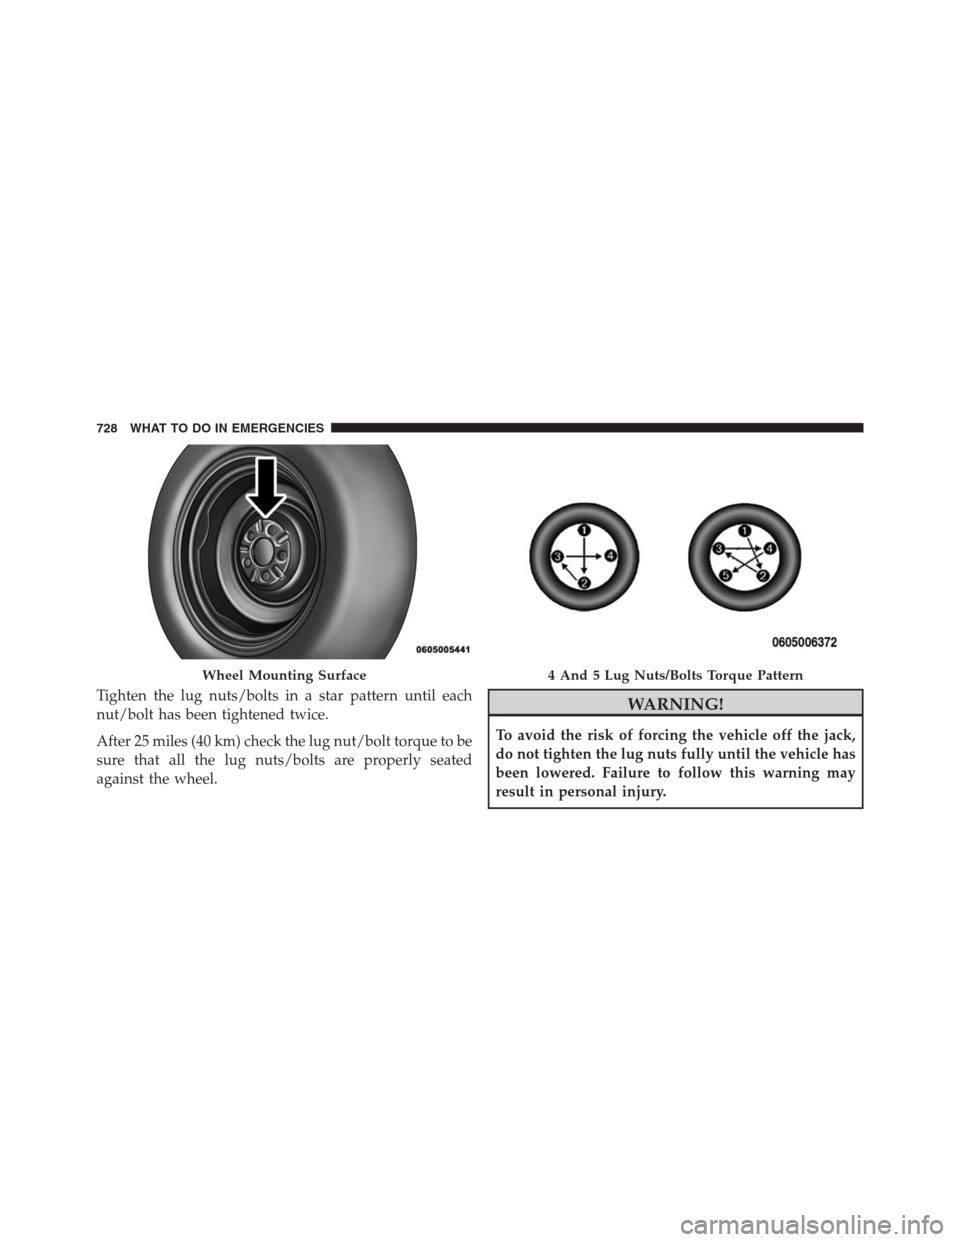 Ram 1500 2016  Owners Manual Tighten the lug nuts/bolts in a star pattern until each
nut/bolt has been tightened twice.
After 25 miles (40 km) check the lug nut/bolt torque to be
sure that all the lug nuts/bolts are properly seat